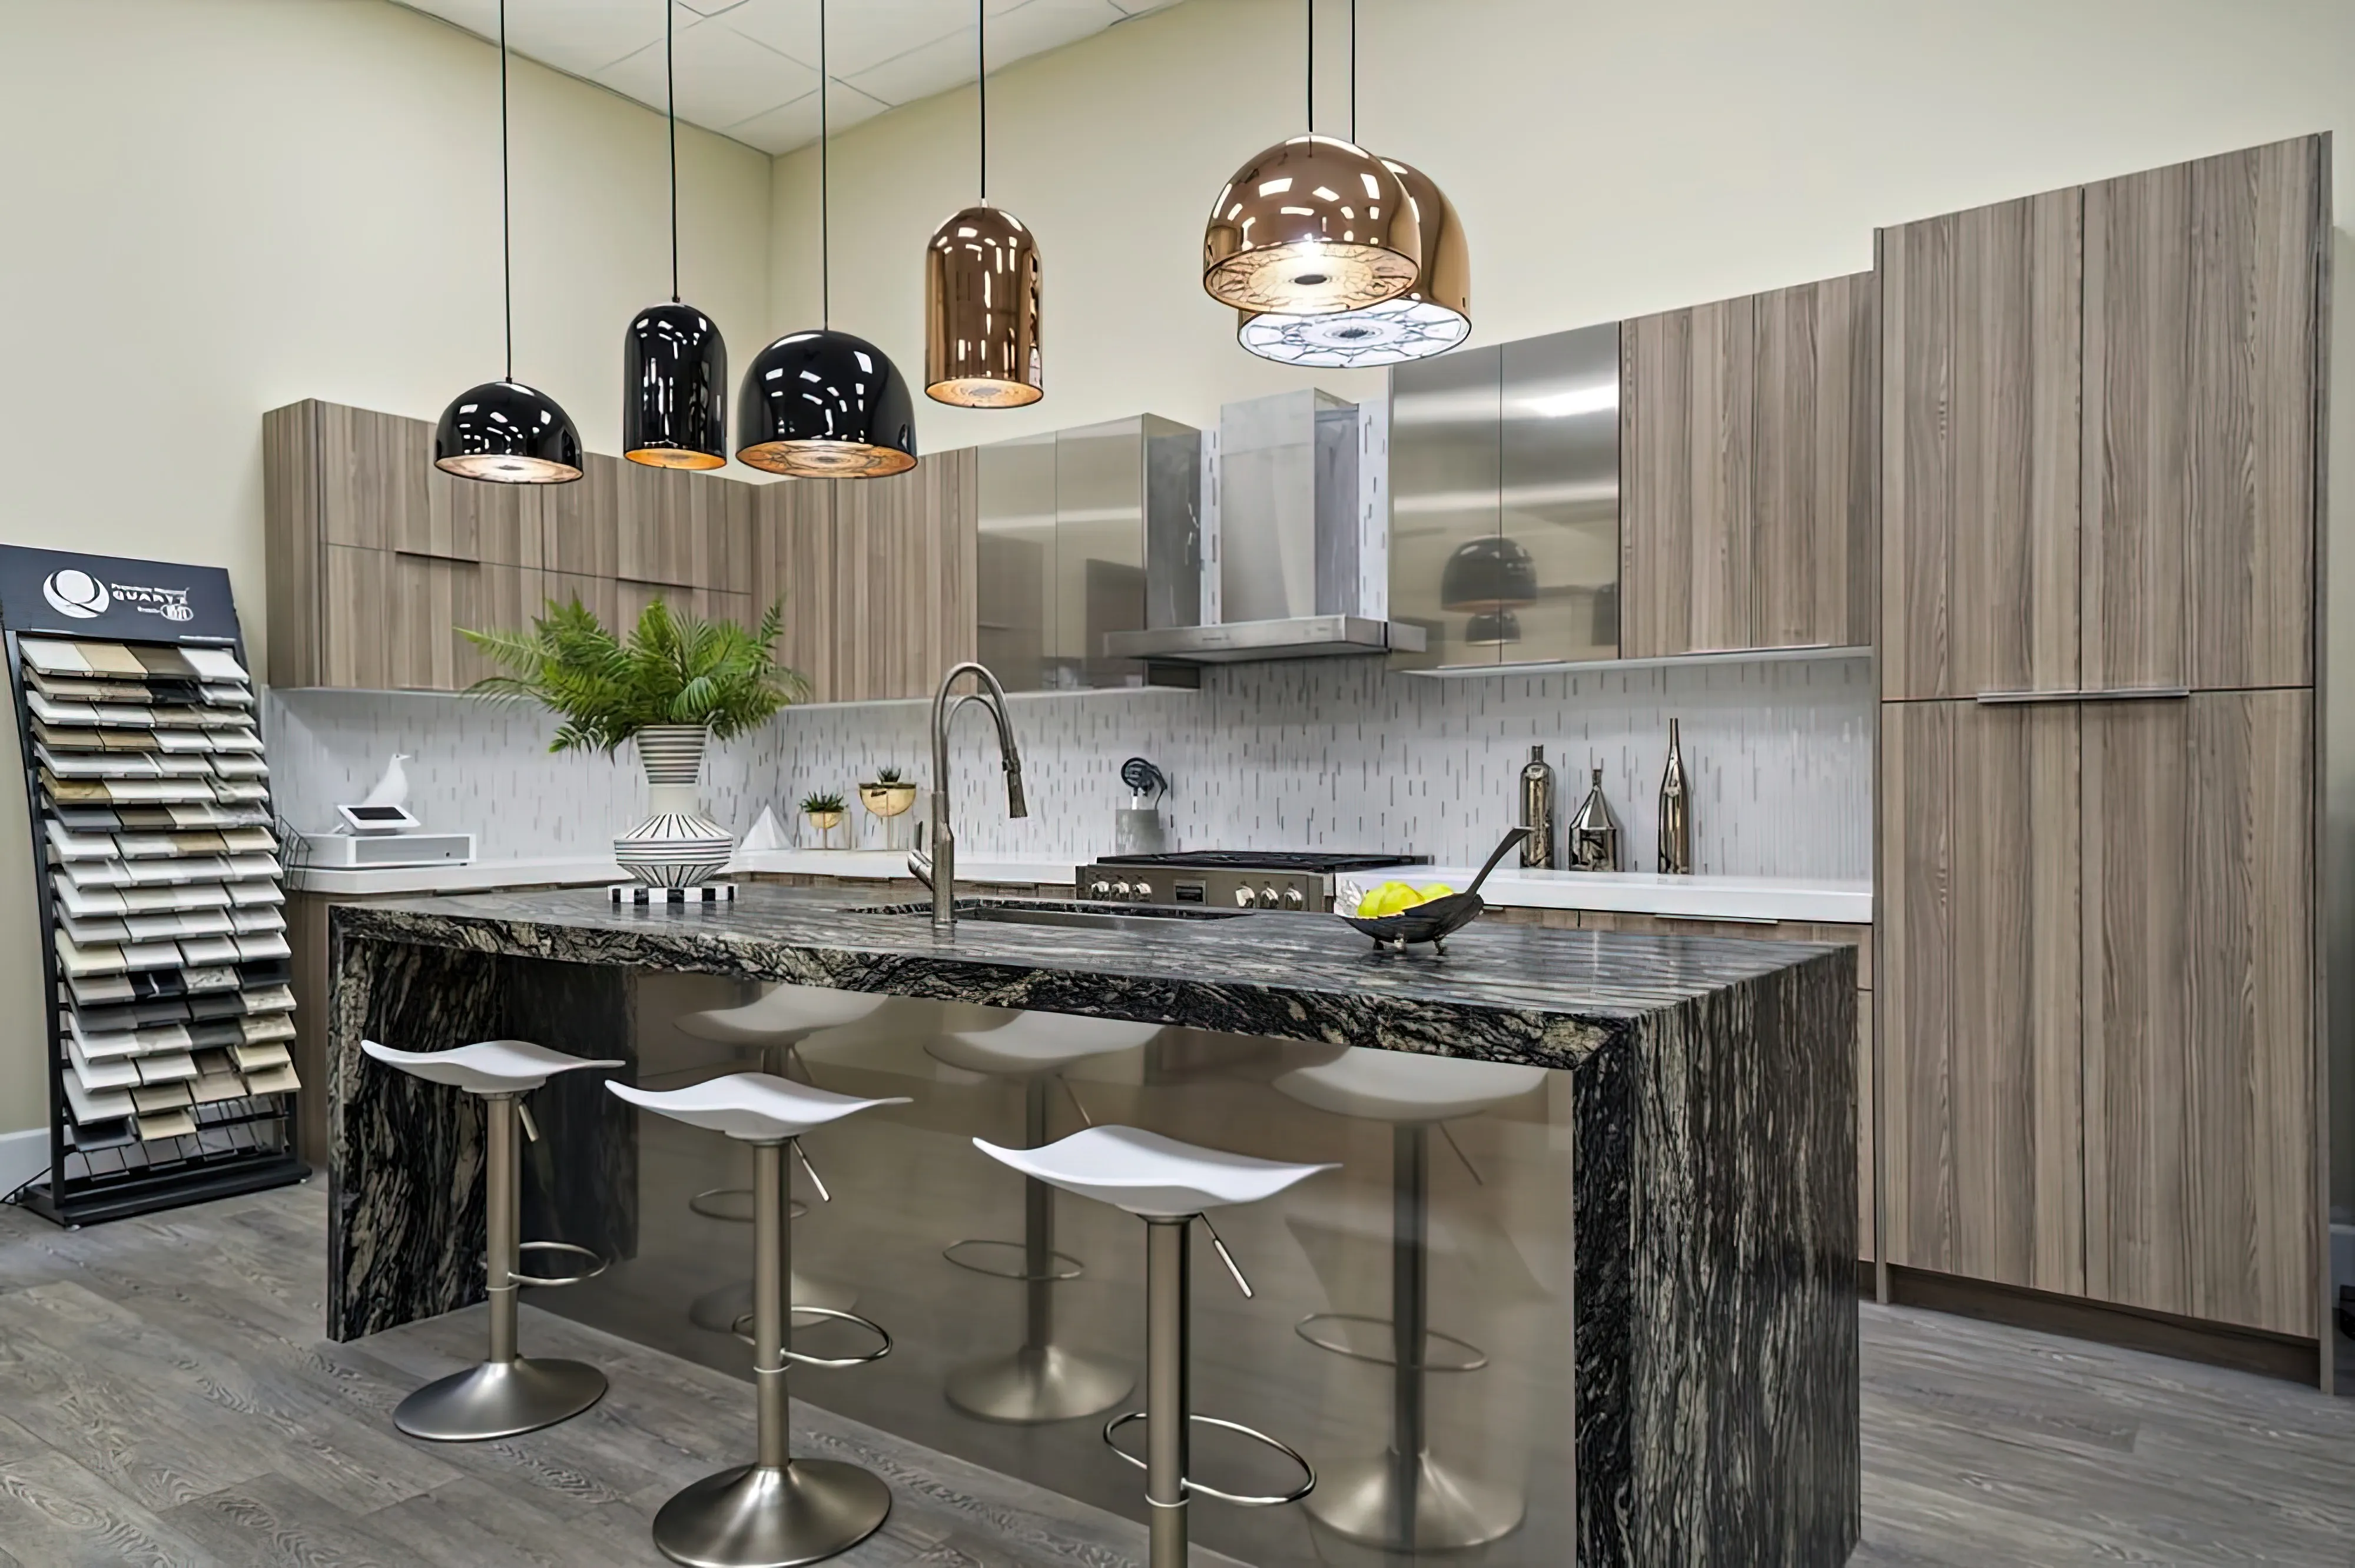 For surfaces in the kitchen and bathroom, soapstone offers a one-of-a-kind and long-lasting alternative. They are perfect for kitchens and other locations where food is made because they are non-porous and don't need to be sealed.